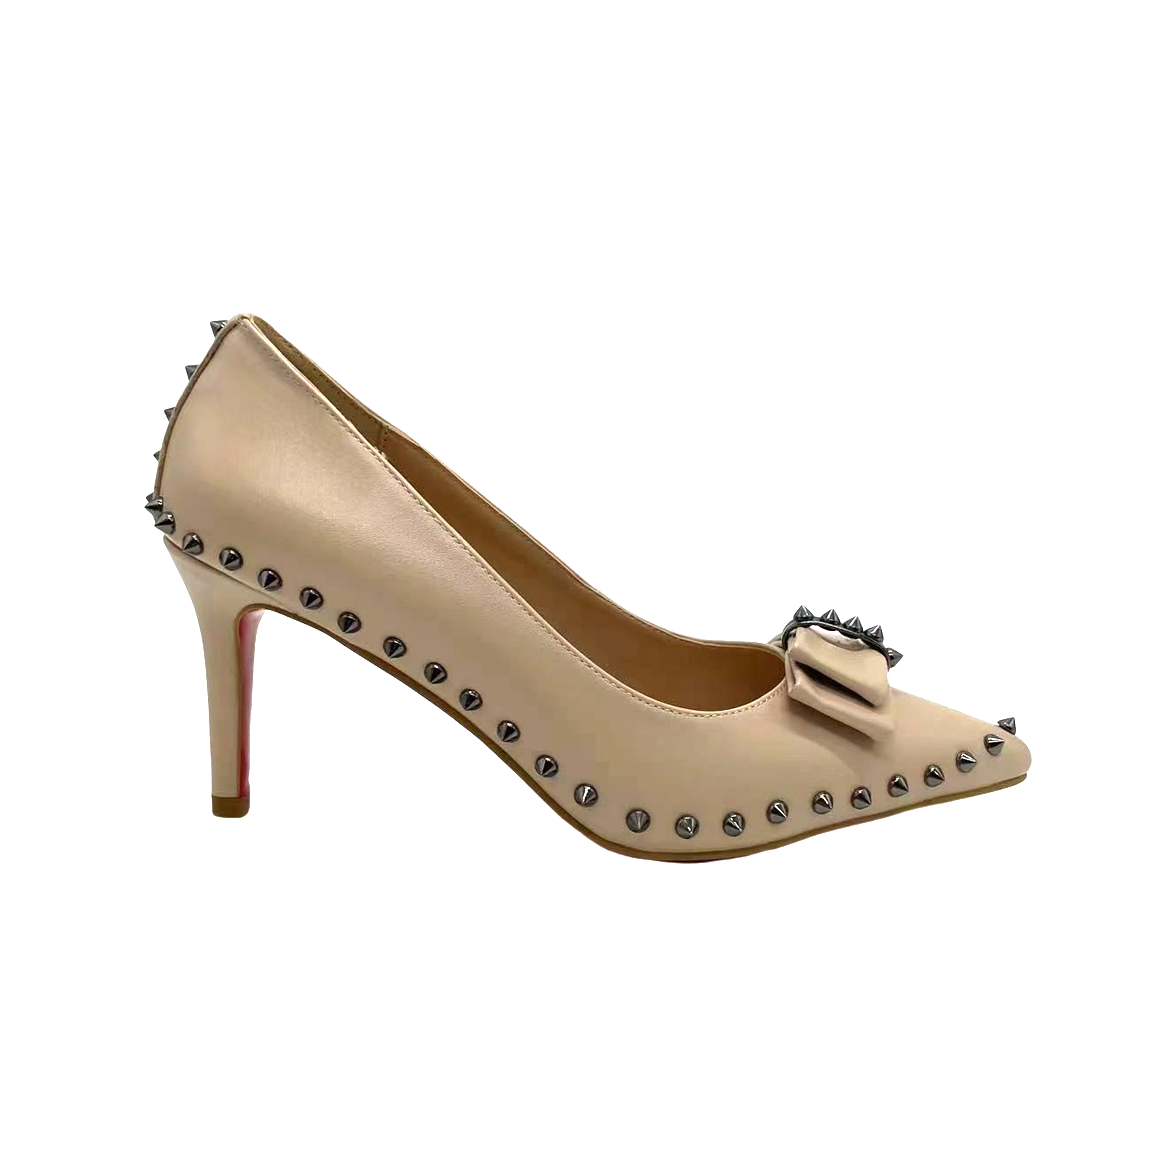 LouLou Red Sole Heels - Nude